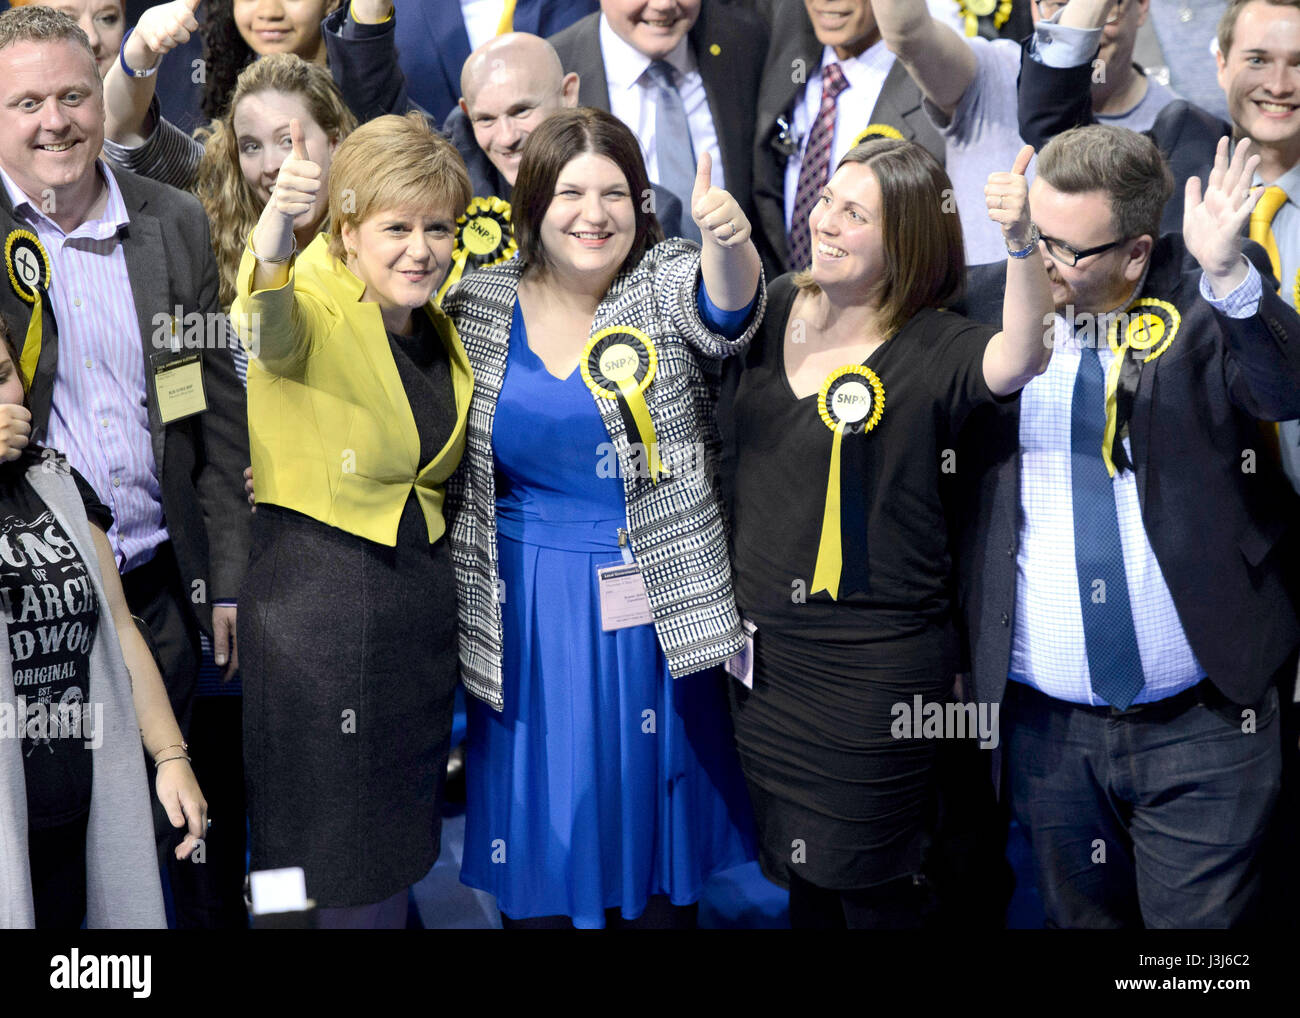 First Minister Nicola Sturgeon arrives with SNP Councillor Susan Aitken and meets supporters and councillors at the Emirates Stadium in Glasgow as election staff count ballot papers for the local elections. Stock Photo